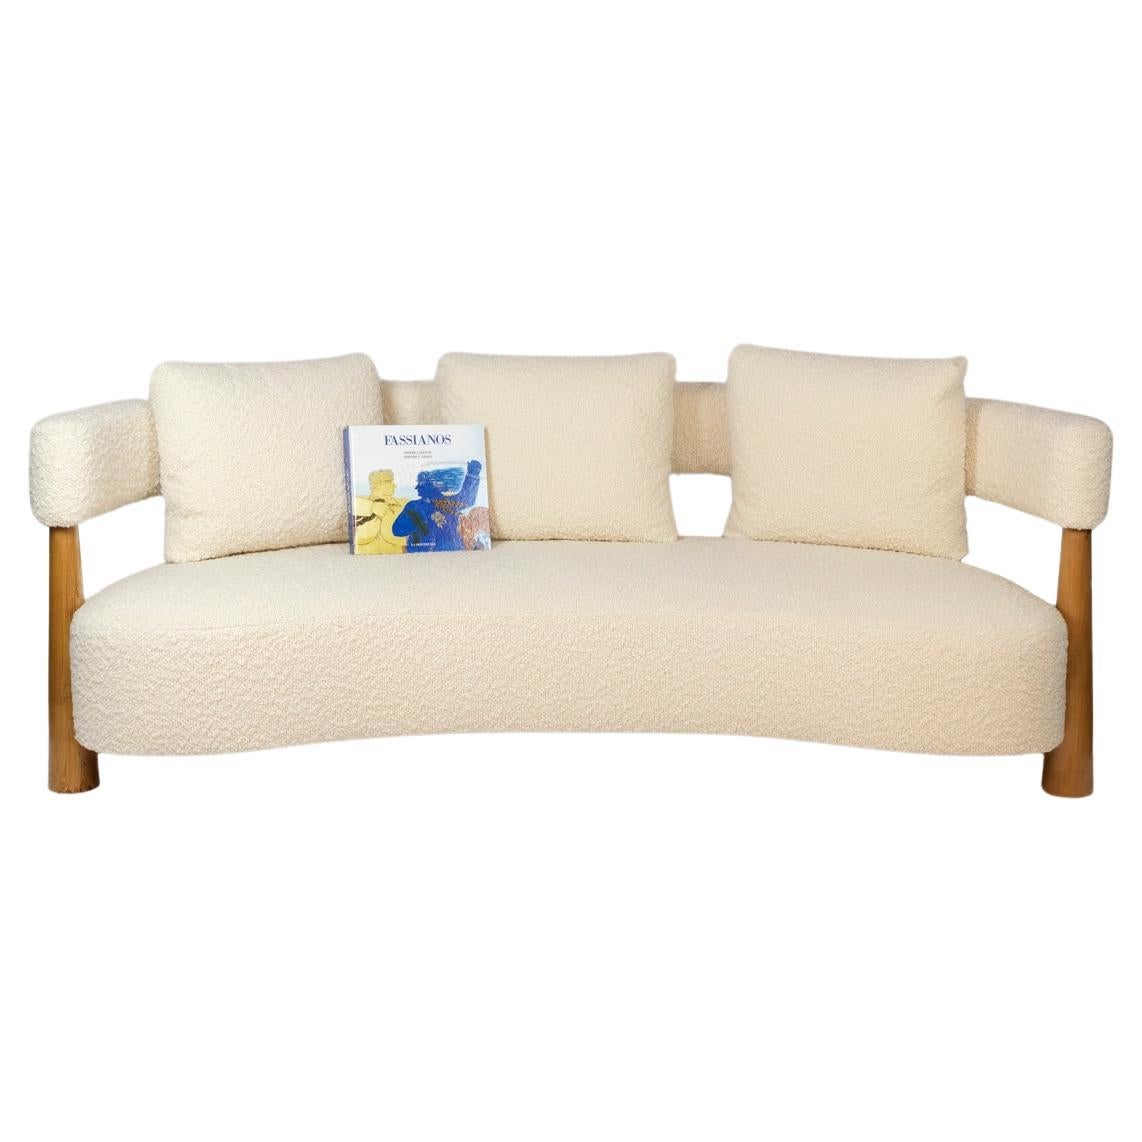 3-seater “bean” shaped sofa. Contemporary work. For Sale